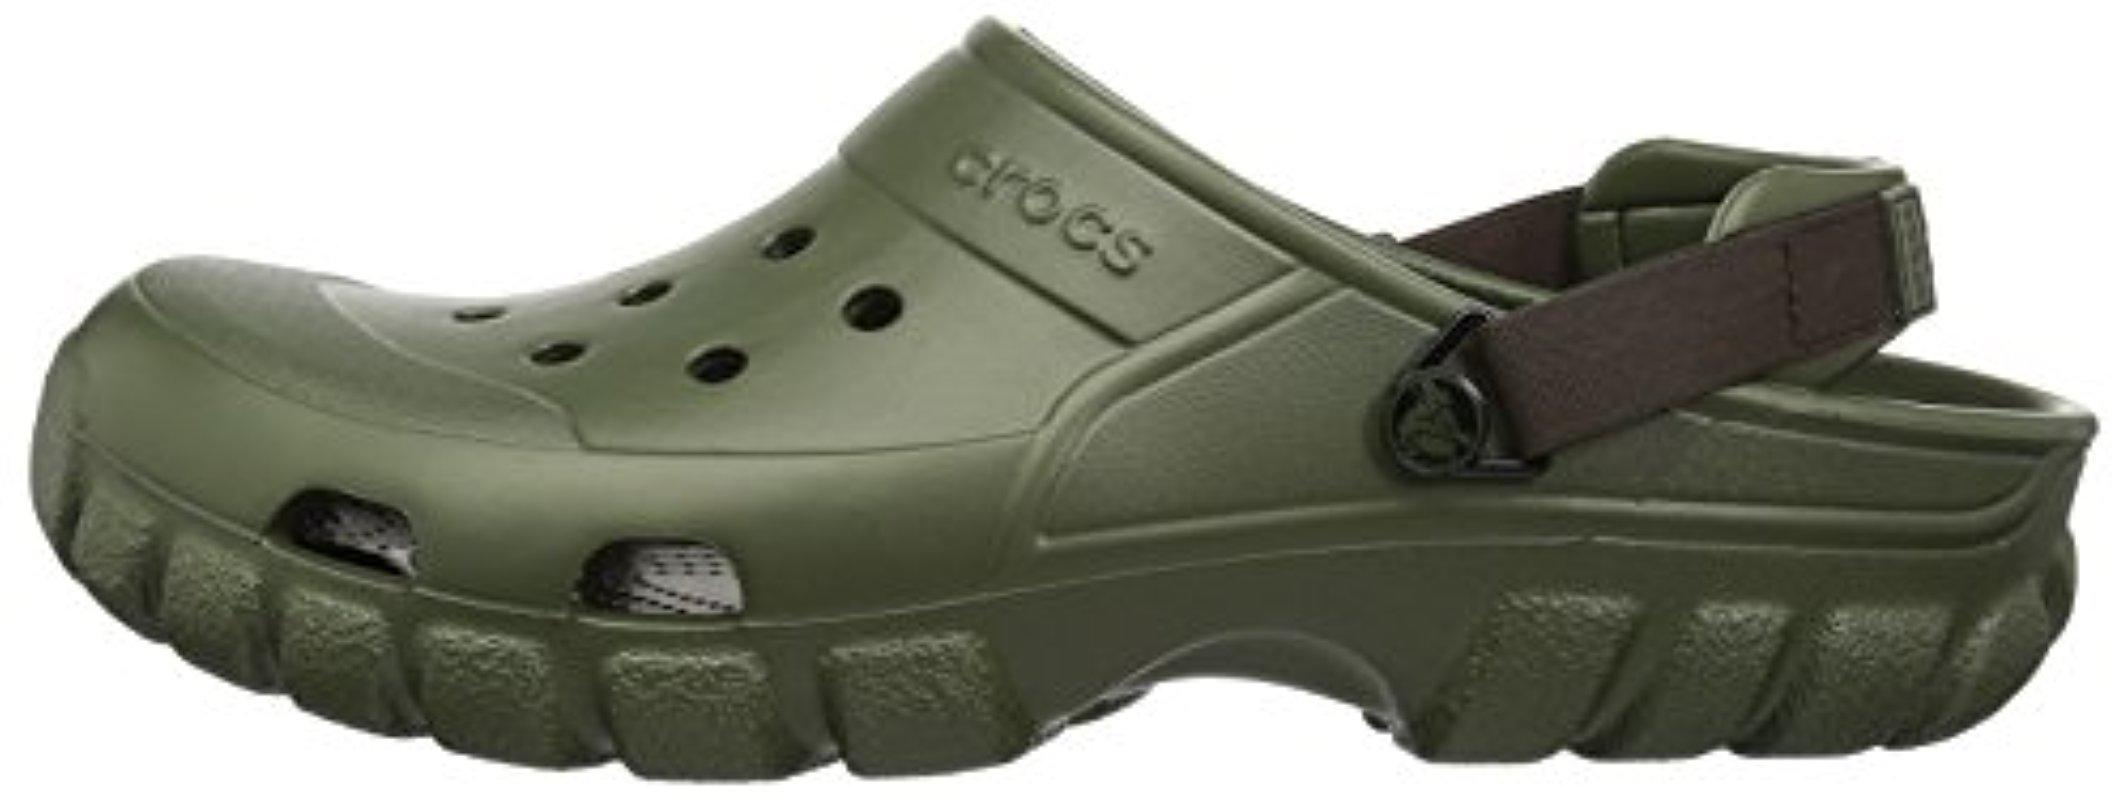 Crocs™ And Offroad Sport Clog | Comfort Rugged Outdoor Shoe With 